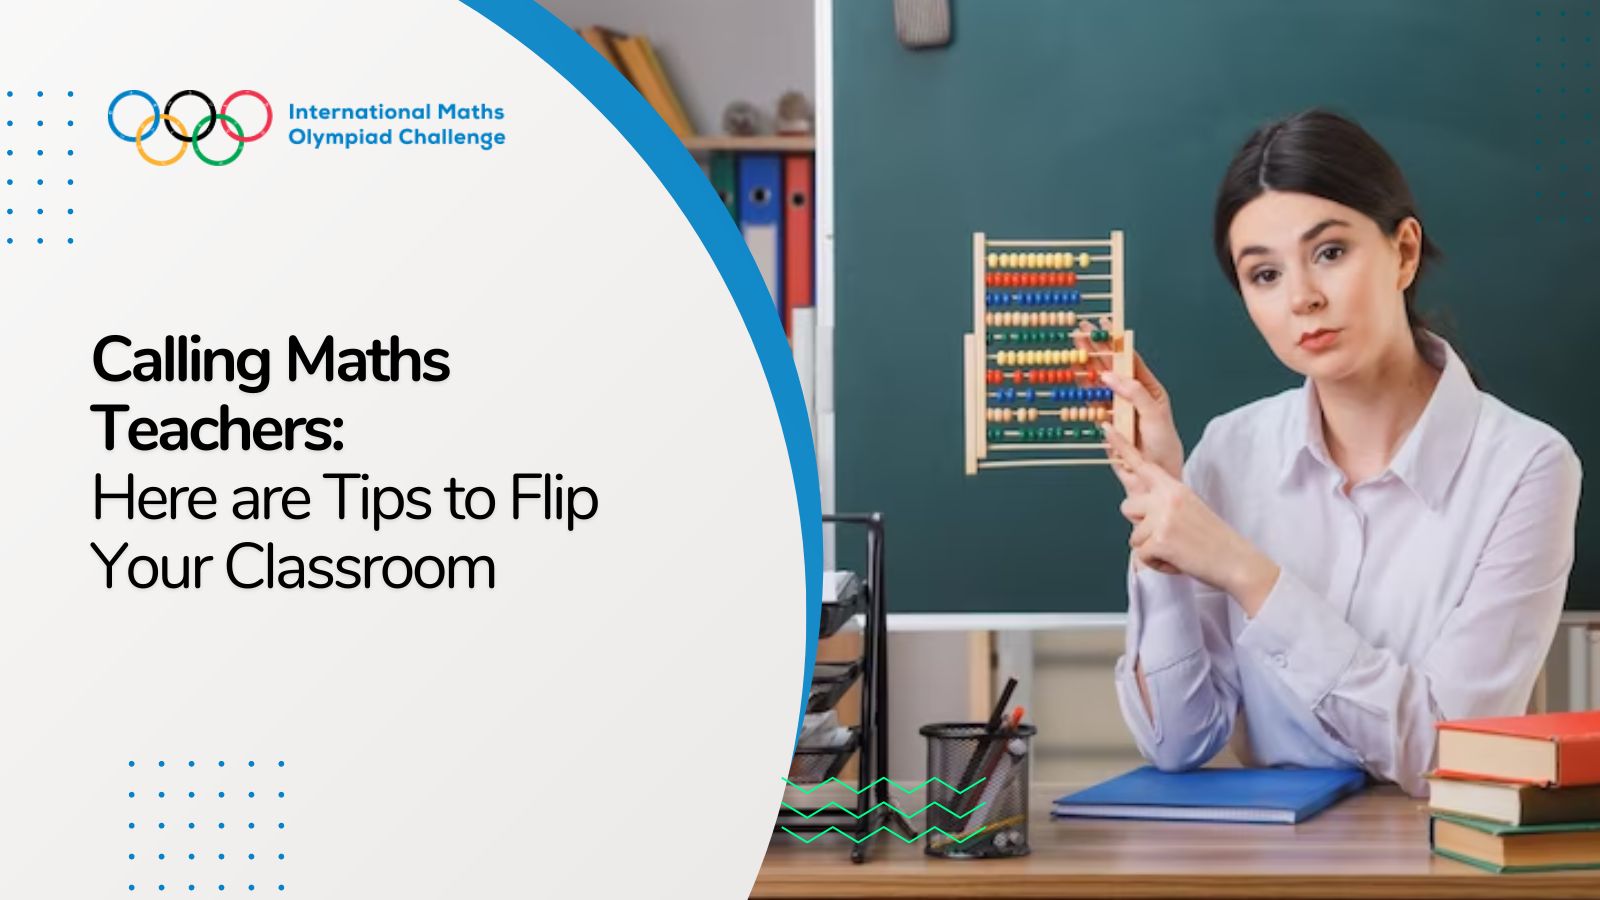 Calling Maths Teachers: Here are Tips to Flip Your Classroom